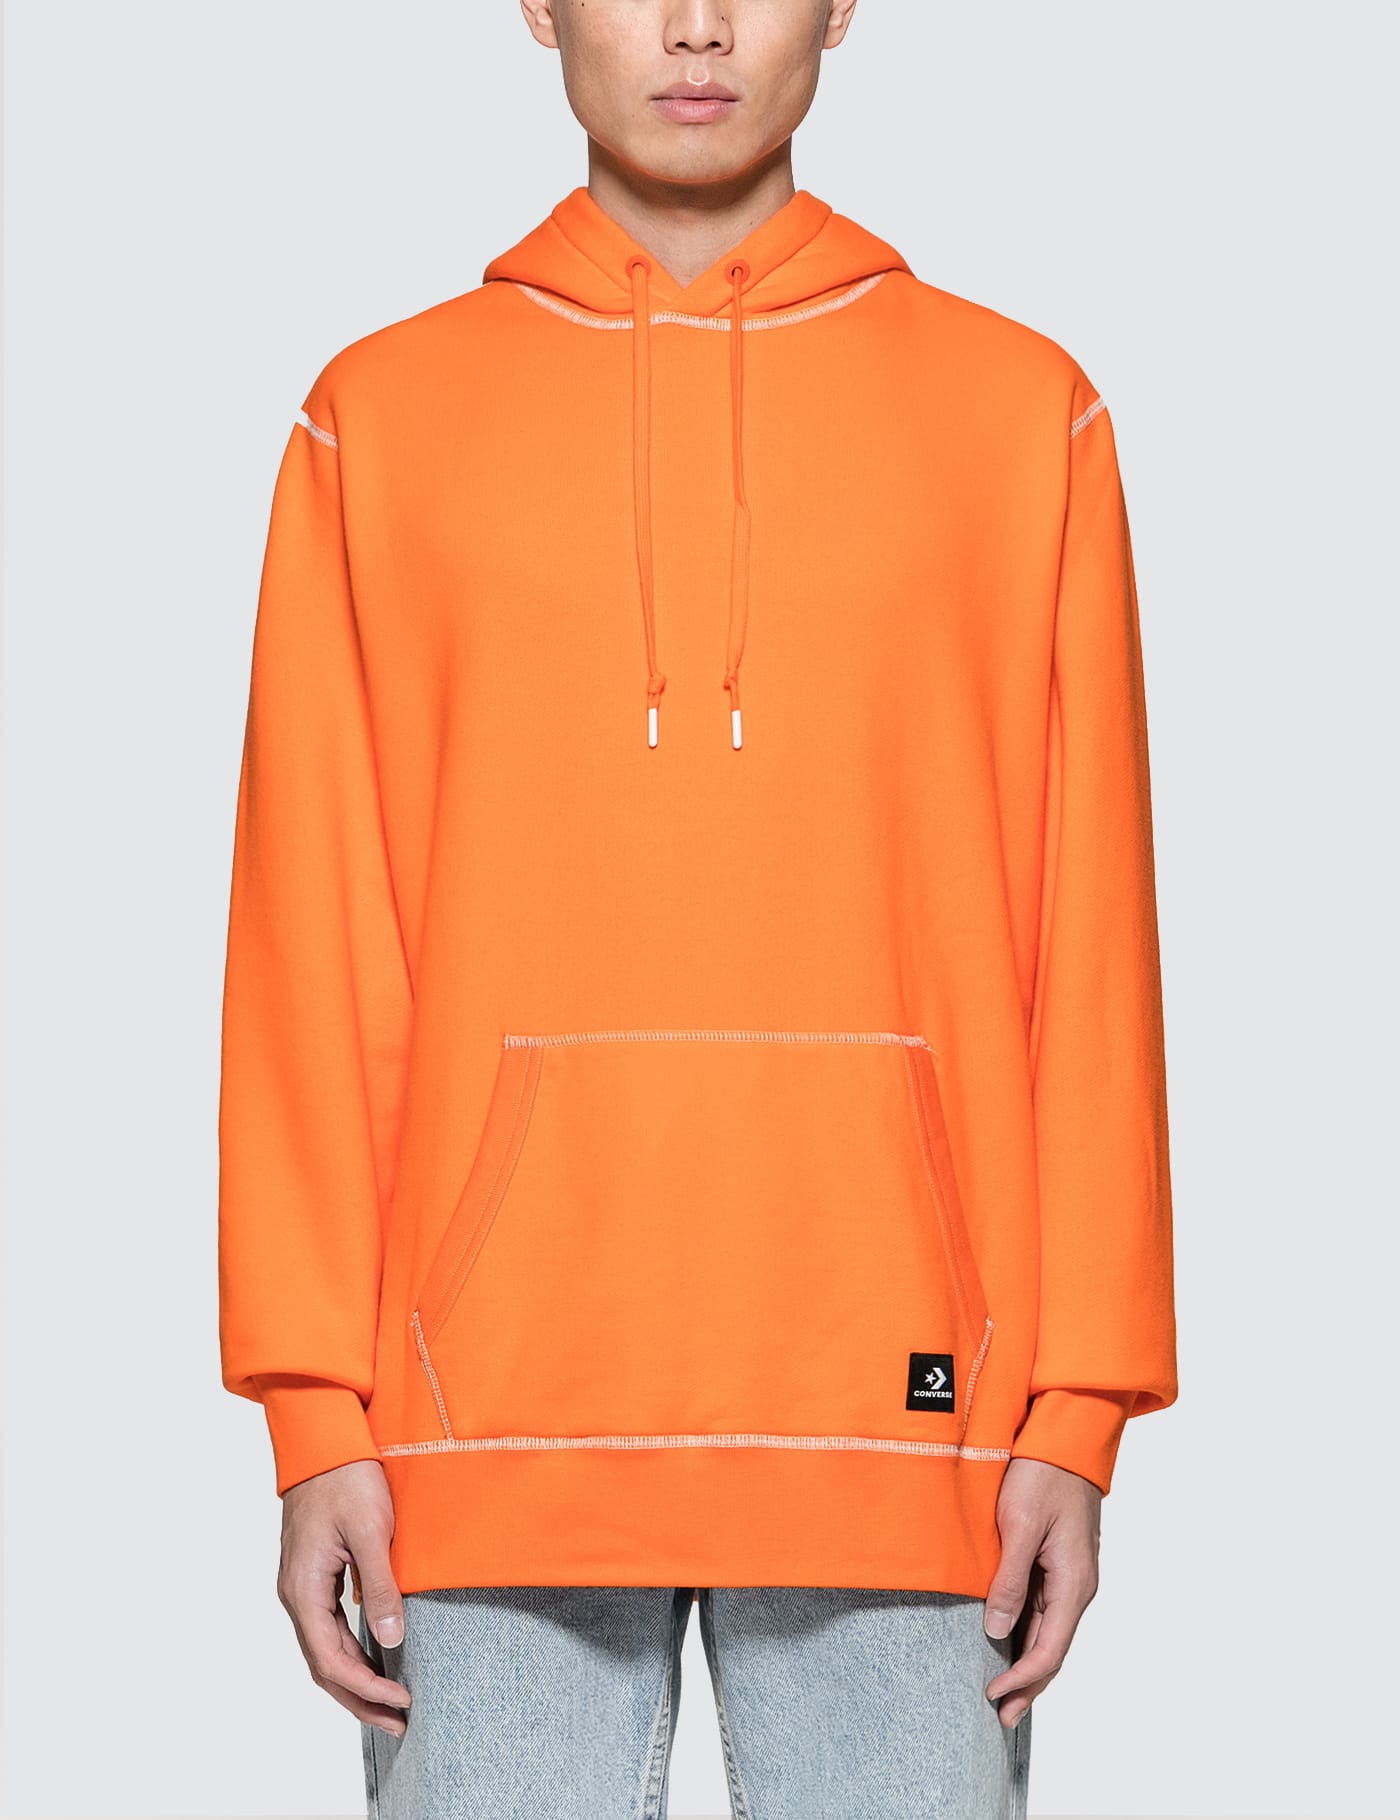 converse x vince staples pullover hoodie